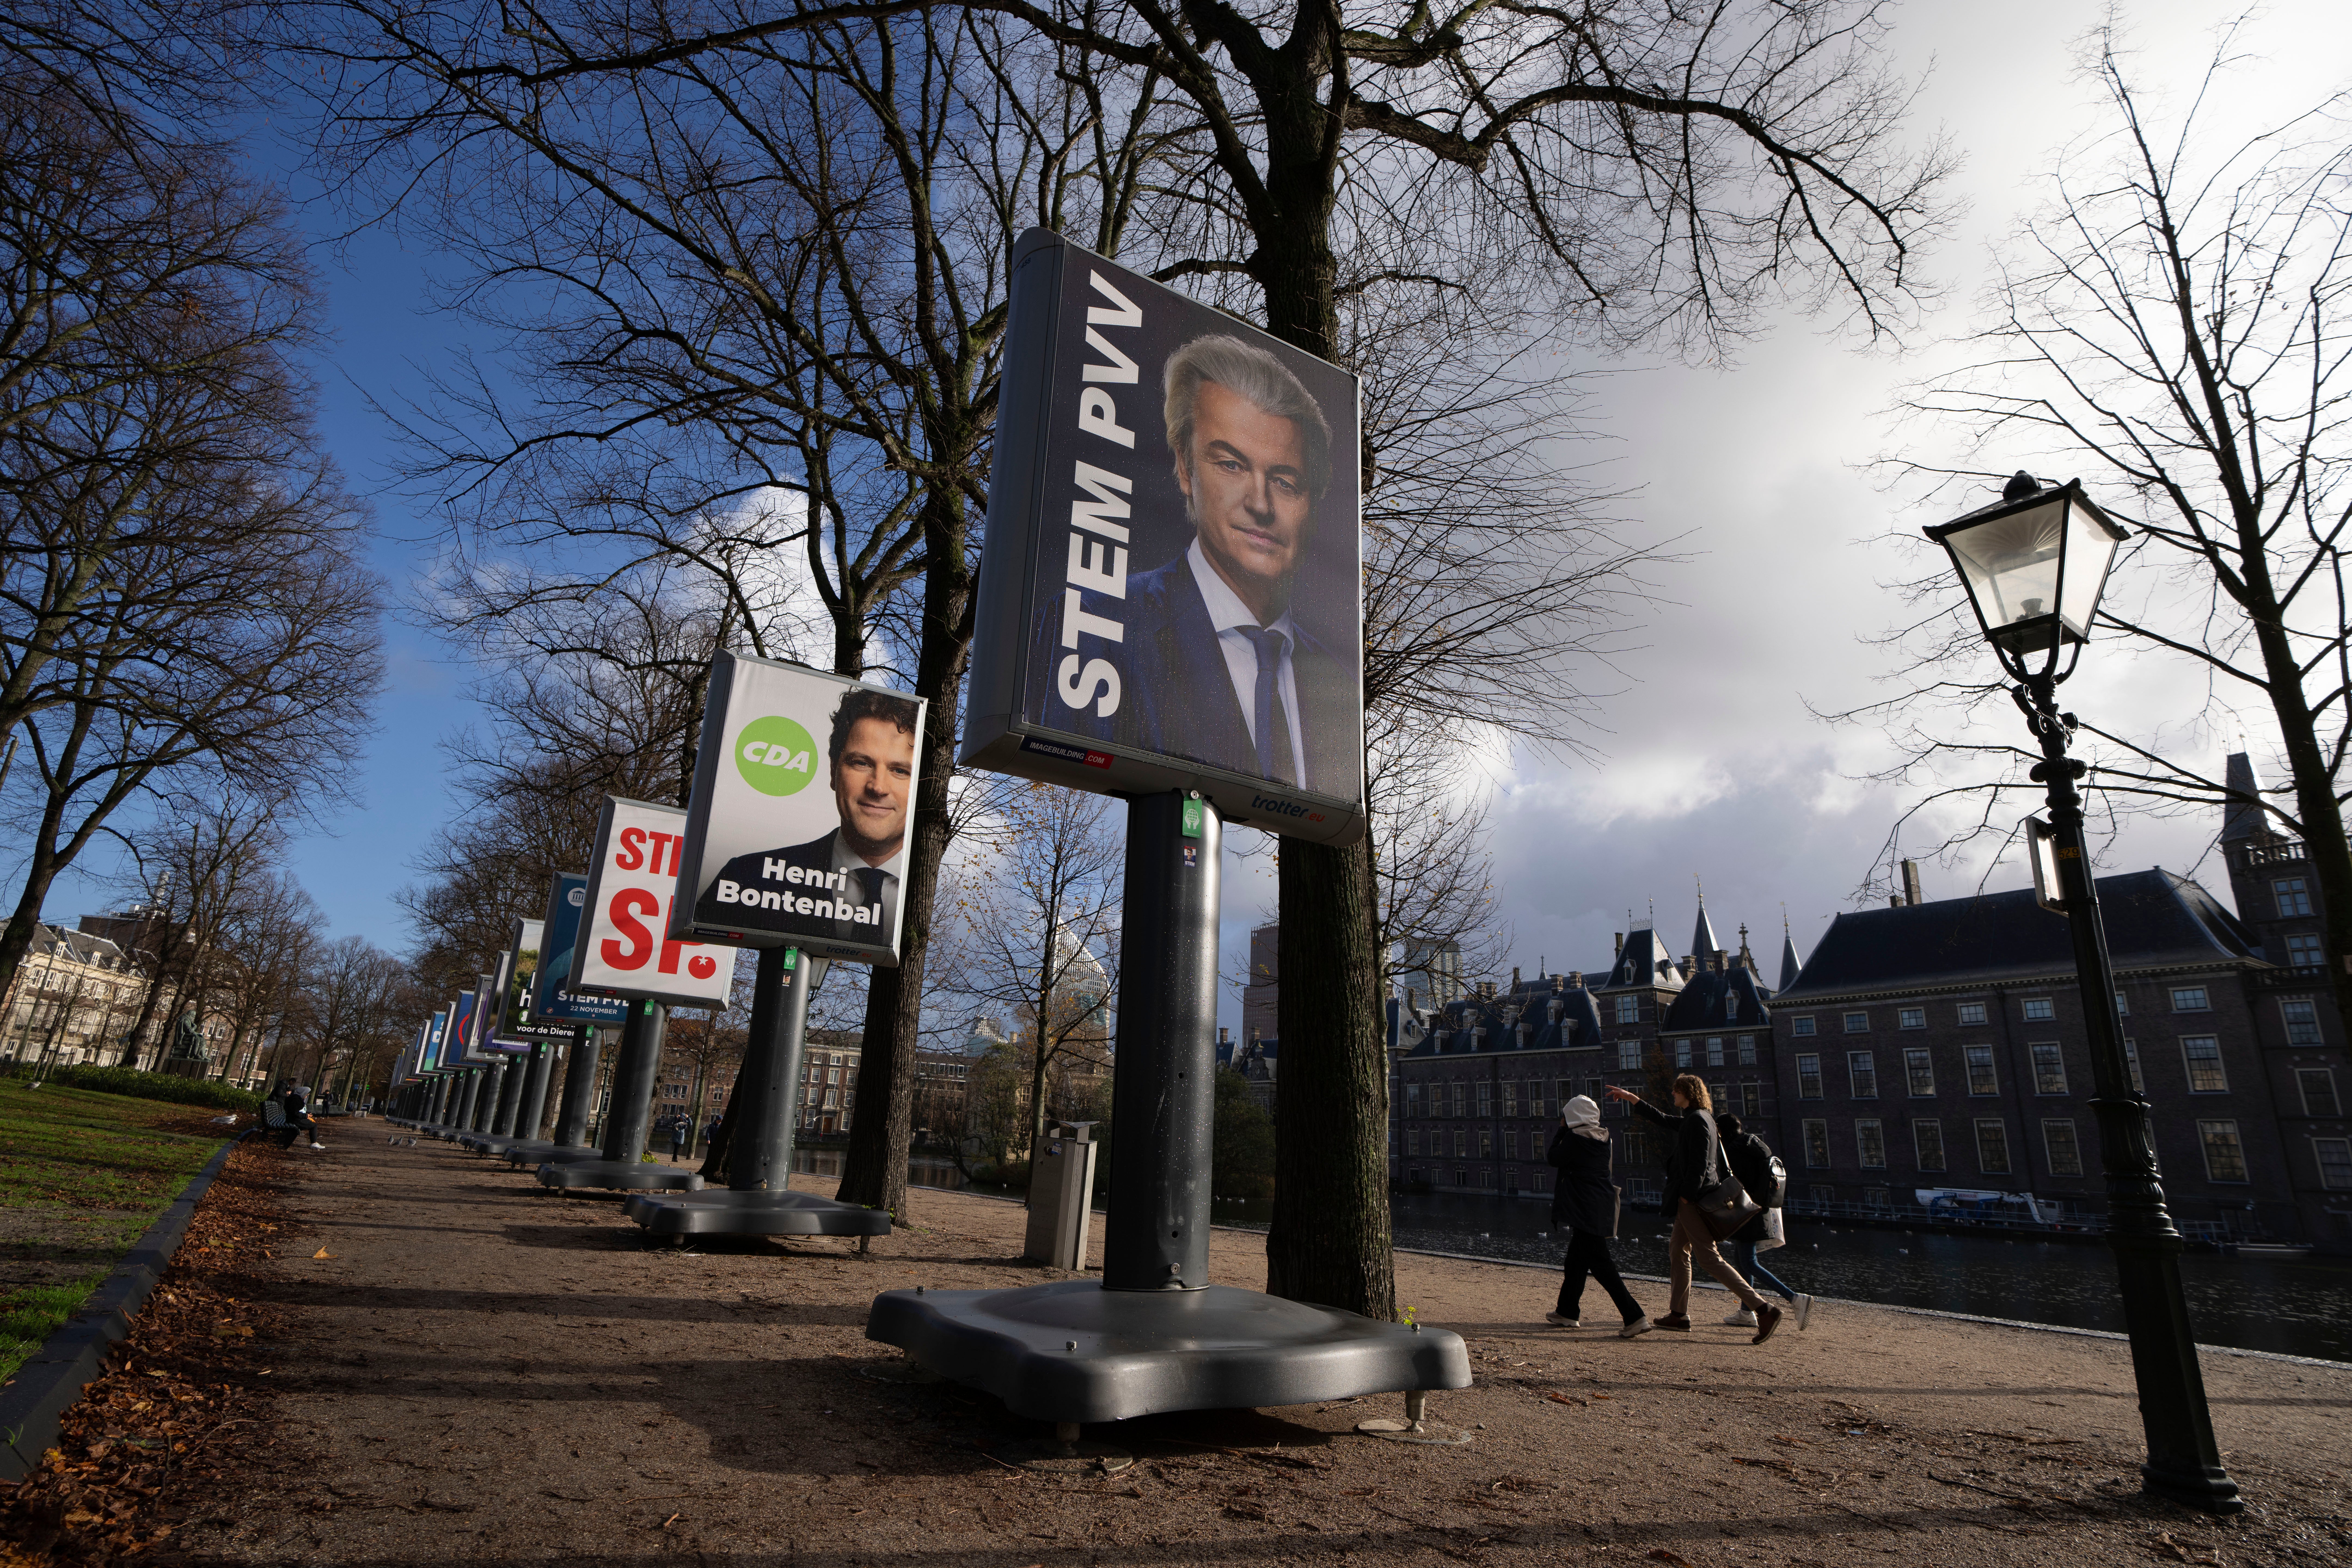 An election billboard for anti-islam lawmaker Geert Wilders is seen near the parliament building in The Hague, Netherlands, Monday, 20 November 2023